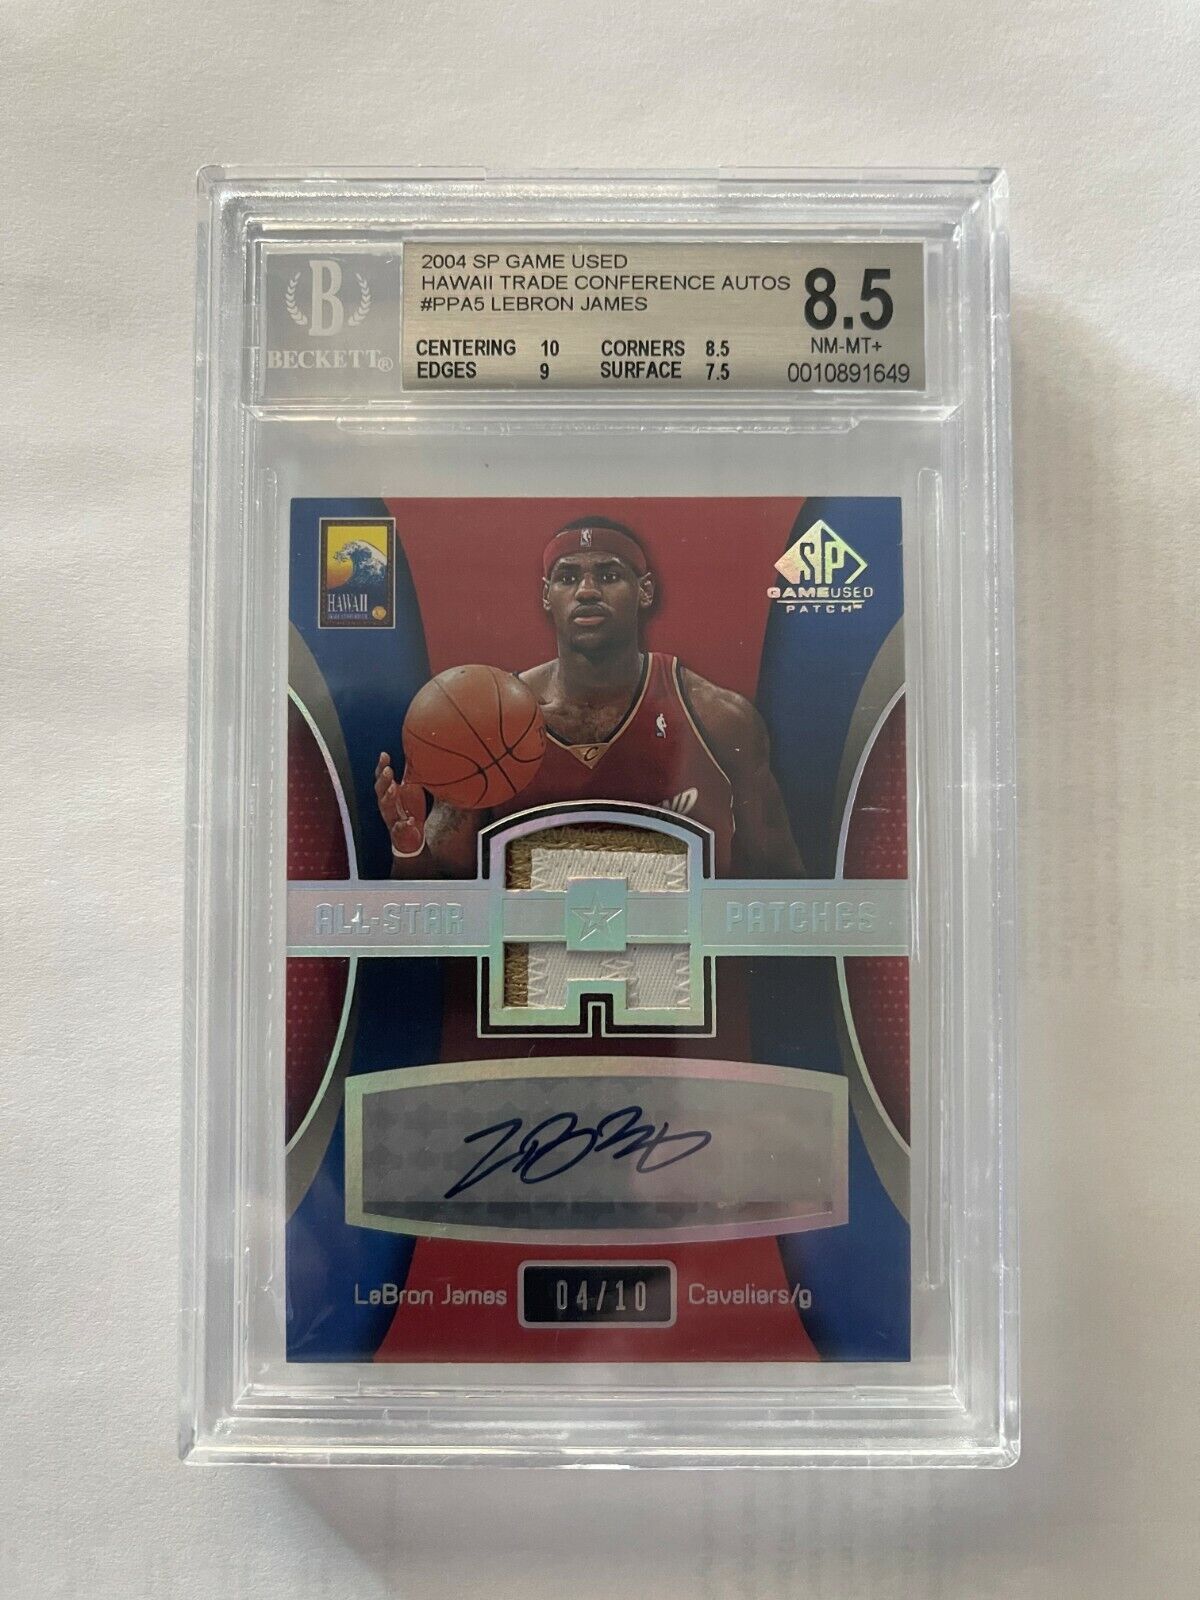 LEBRON JAMES 2004 SP GAME USED PATCH AUTO UD #3 AND #4 OF 10 BGS AUTHENTICATED Без бренда - фотография #5